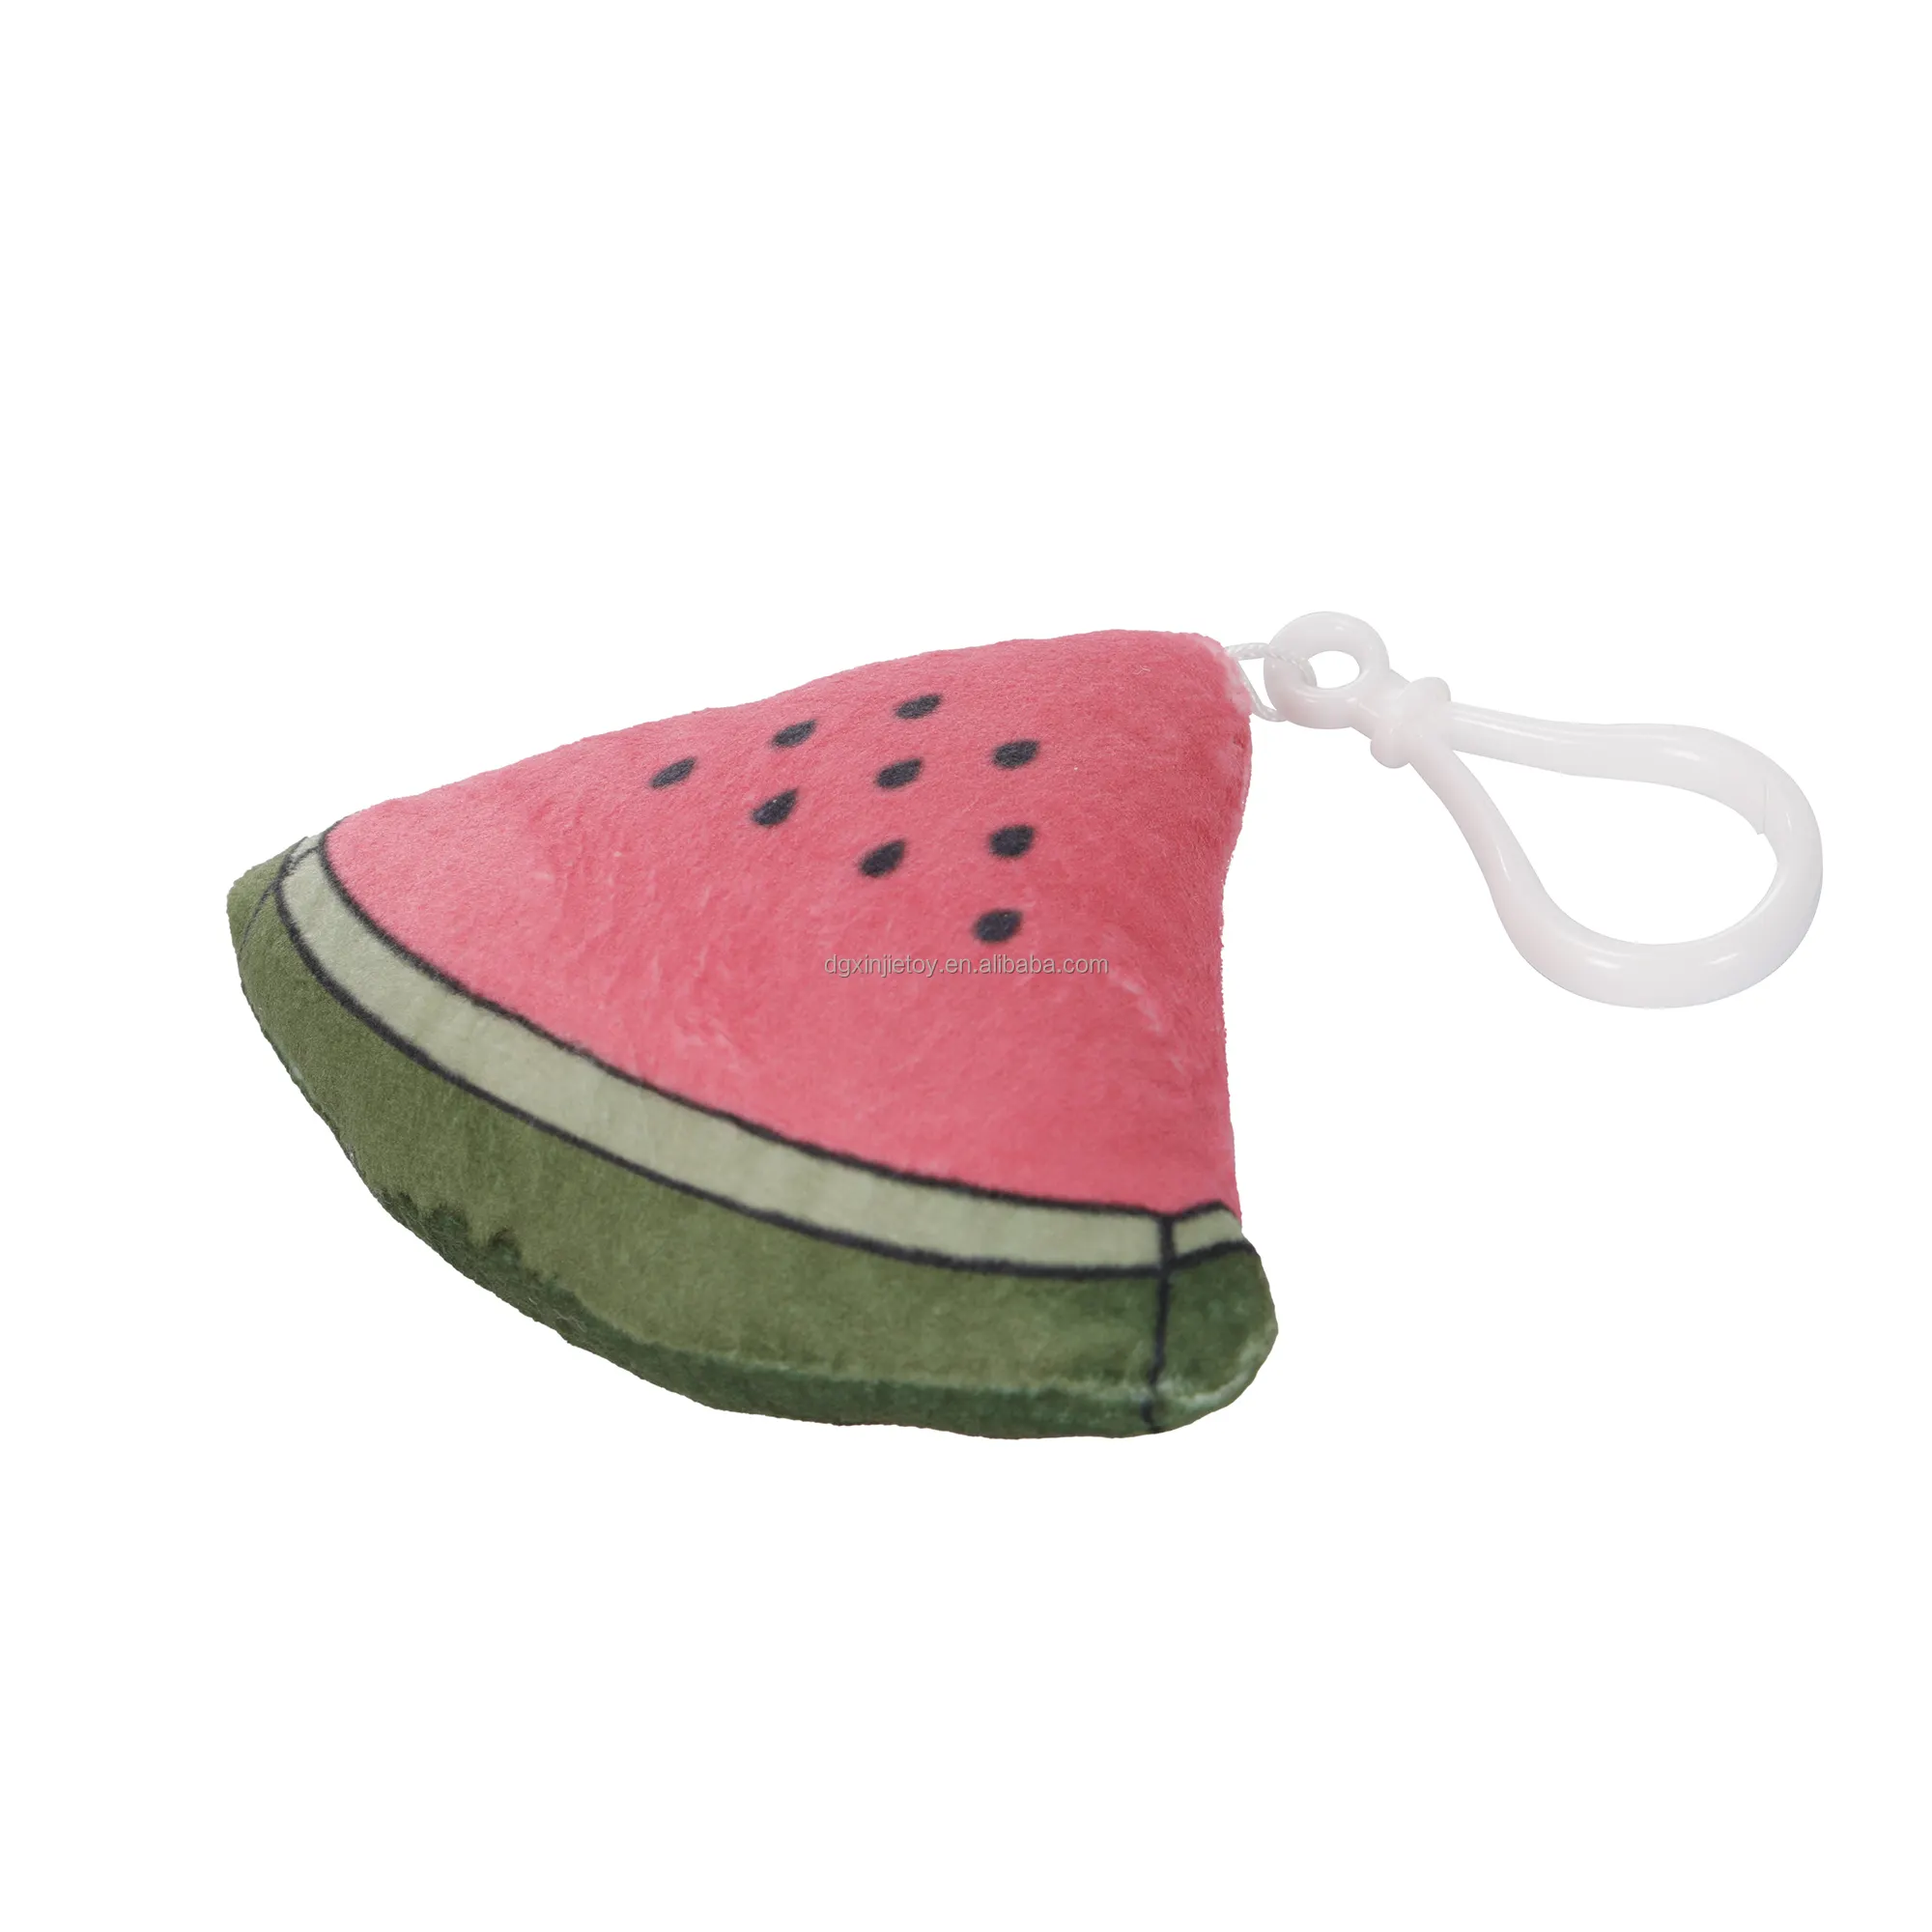 Custom made plush material items of various shapes Stereoscopic watermelon plush figure Creative plush object styling